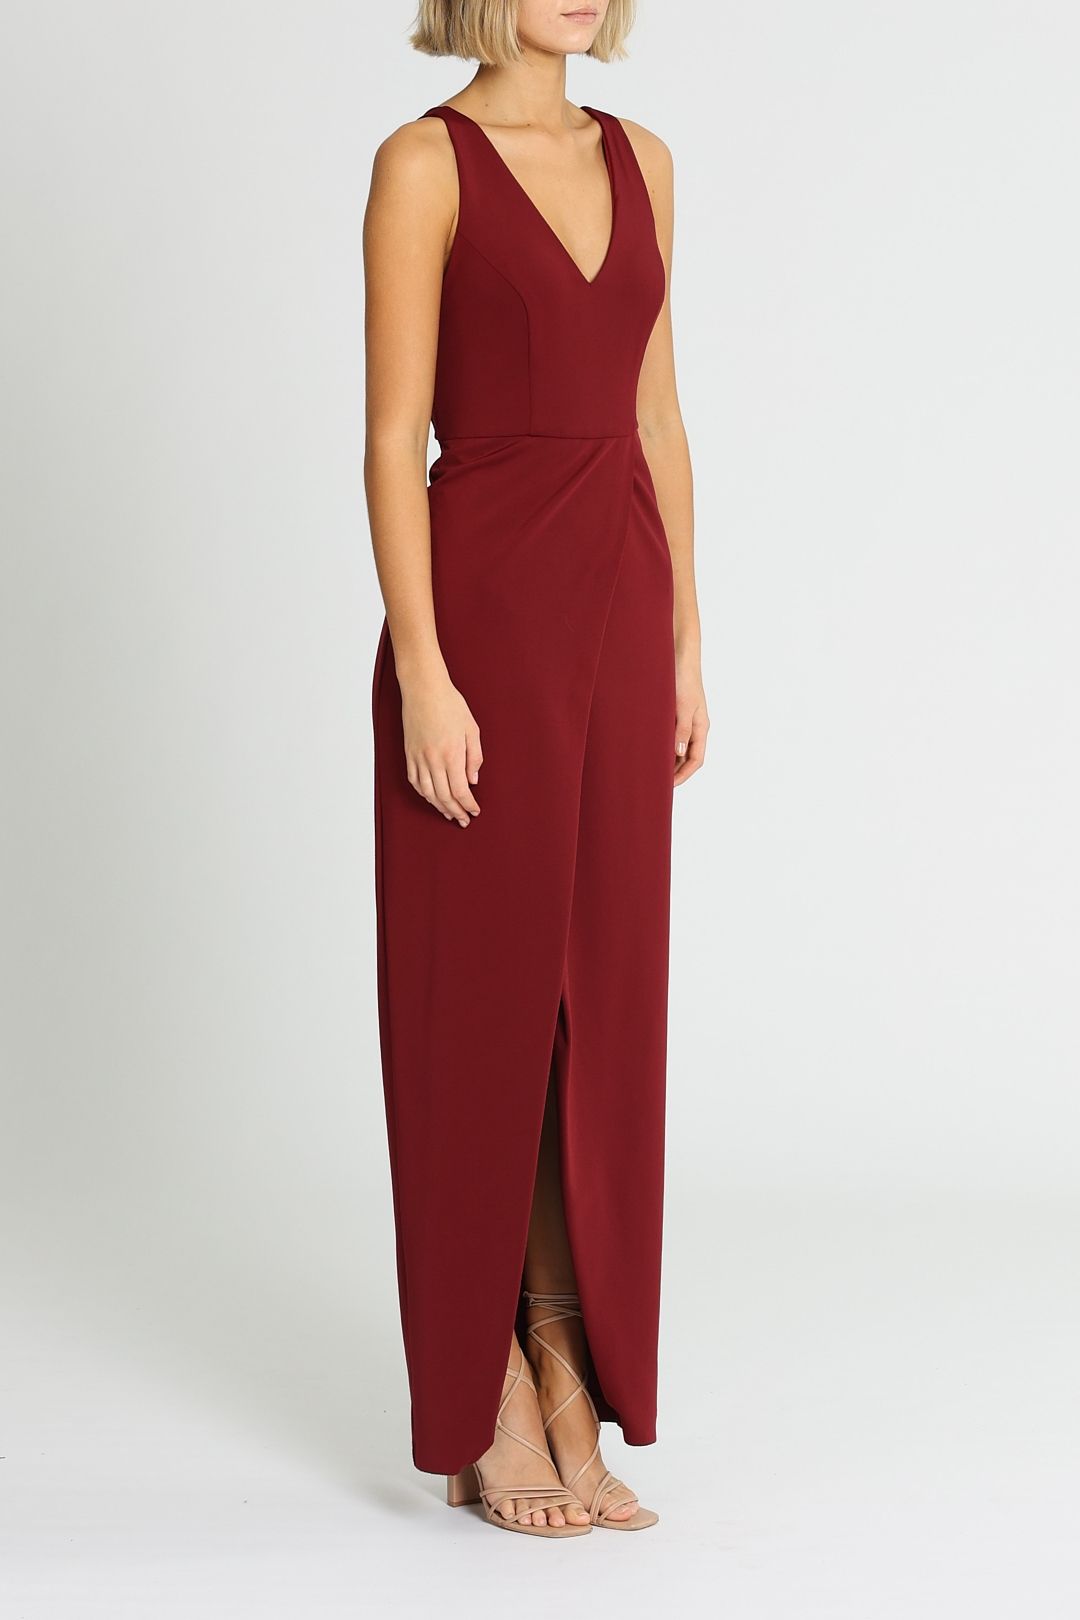 Grace and Hart Gold Rush Neon Gown in Wine Red Tulip Skirt